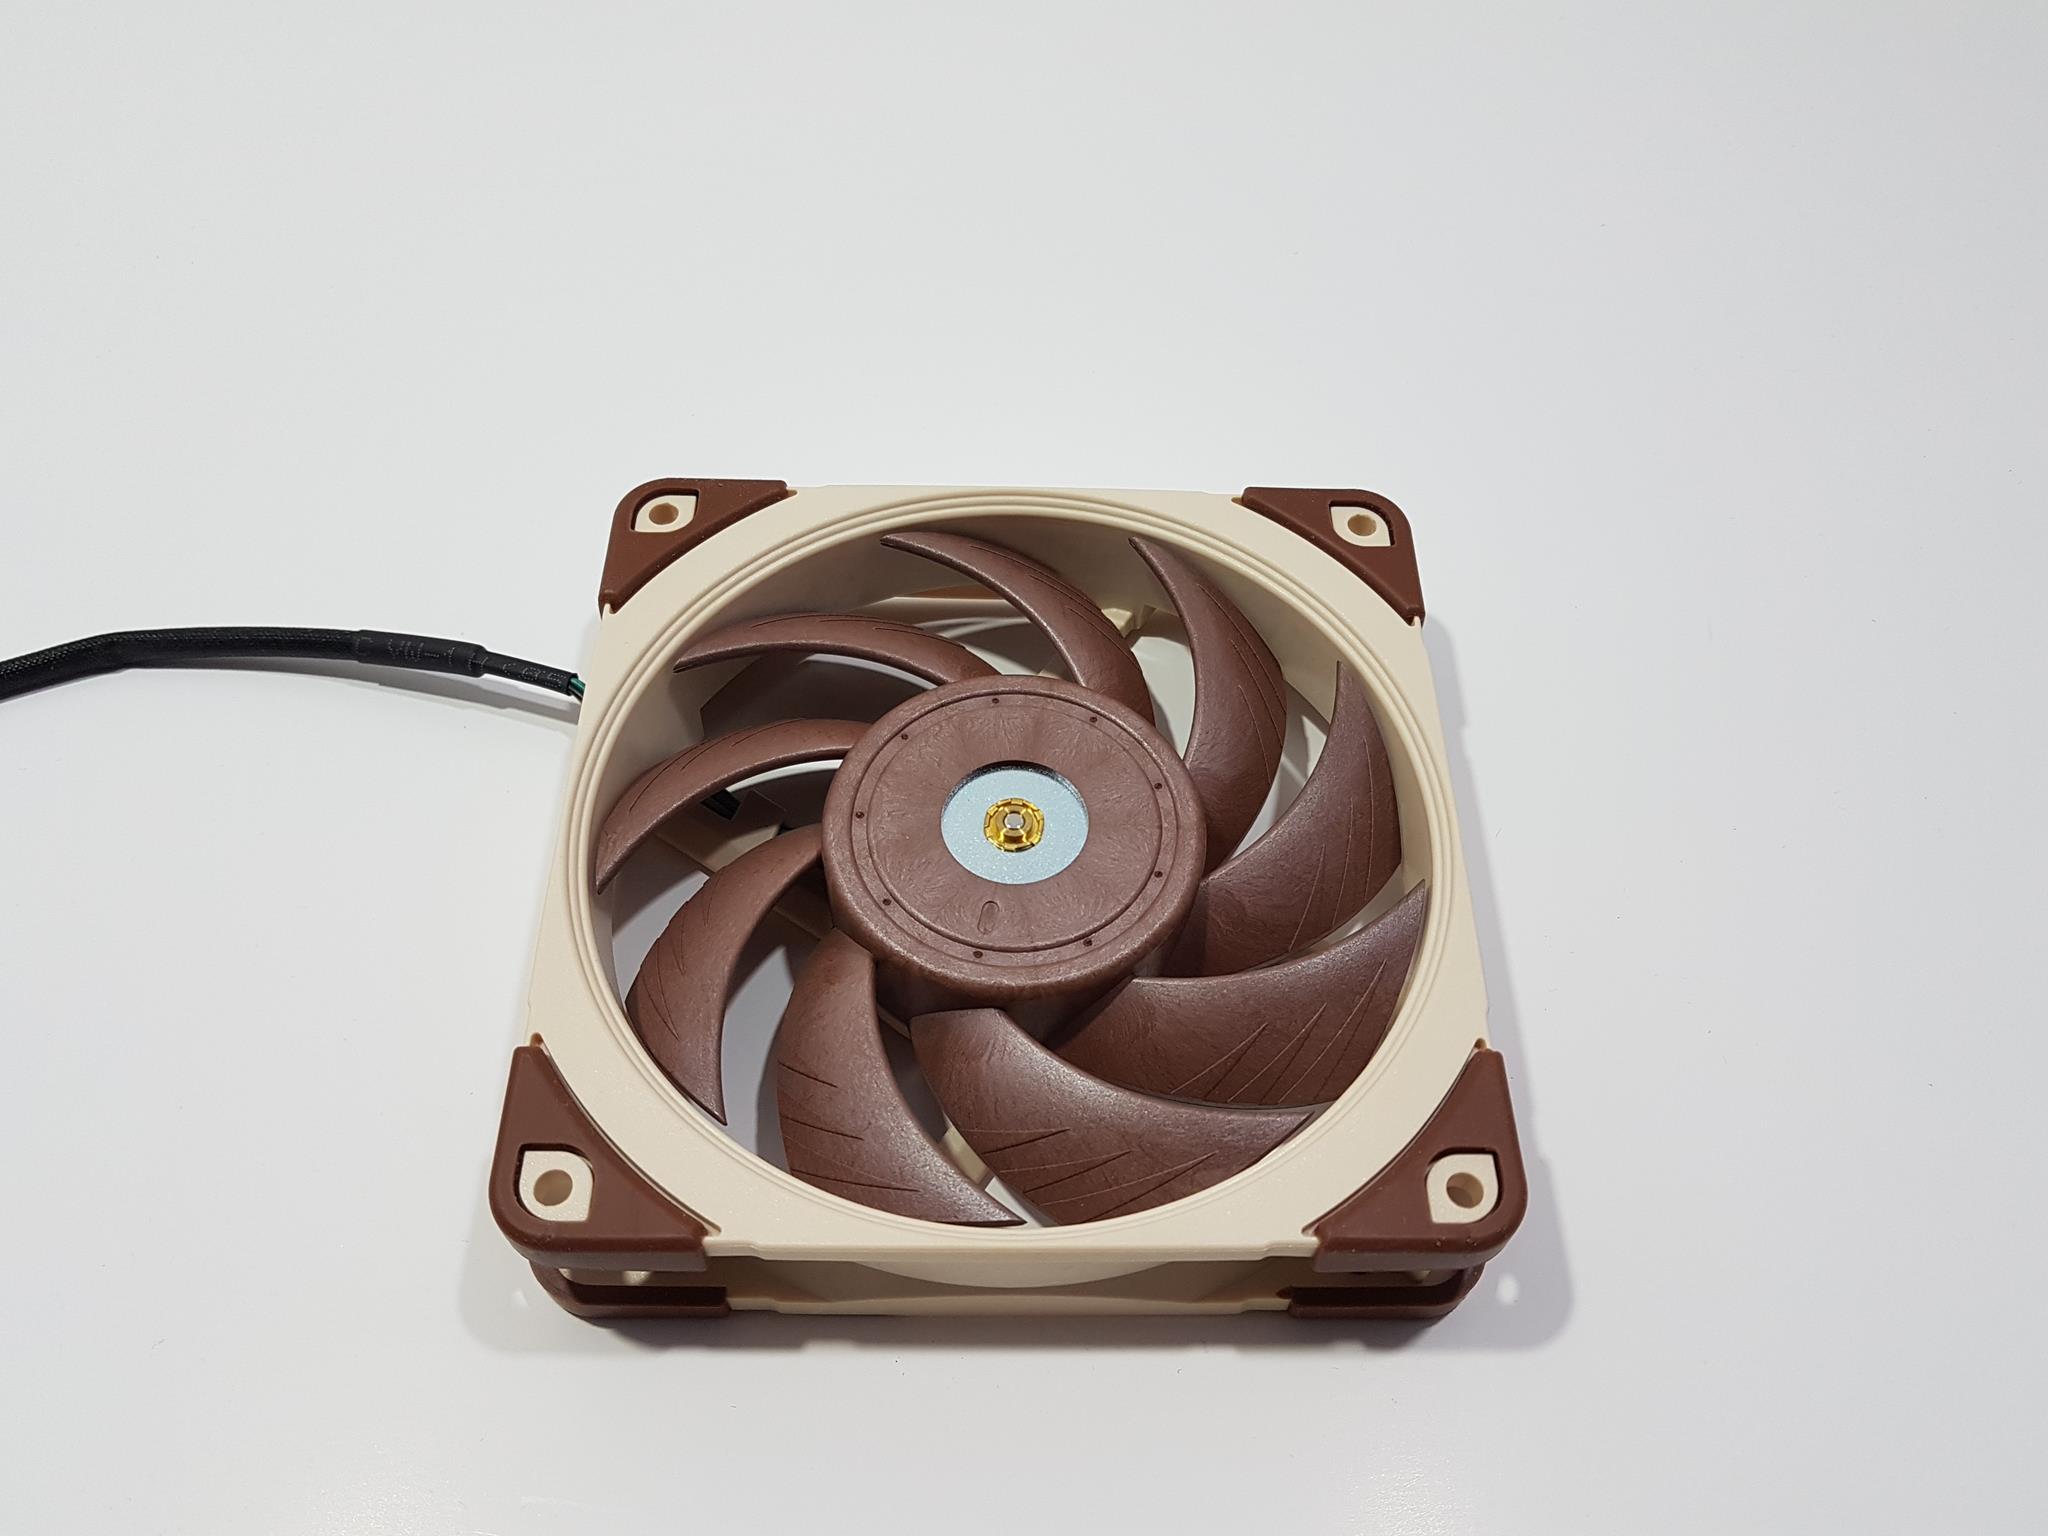 NH-U12A Premium 120mm CPU Cooler with two Quiet NF-A12x25 PWM Fans